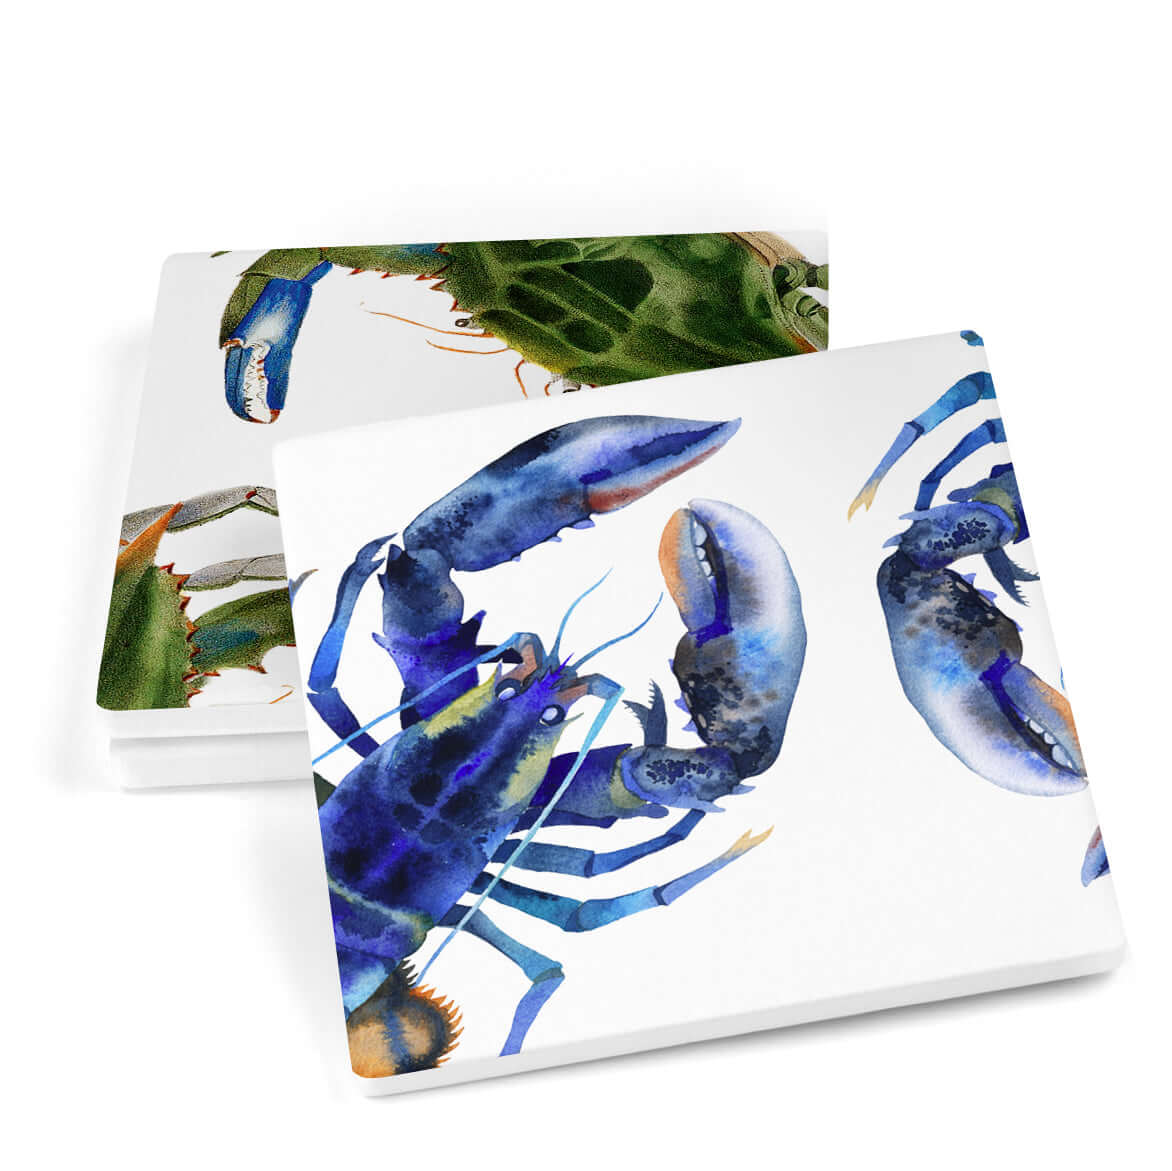 "Pinchy" Crab and Lobster Ceramic Coasters